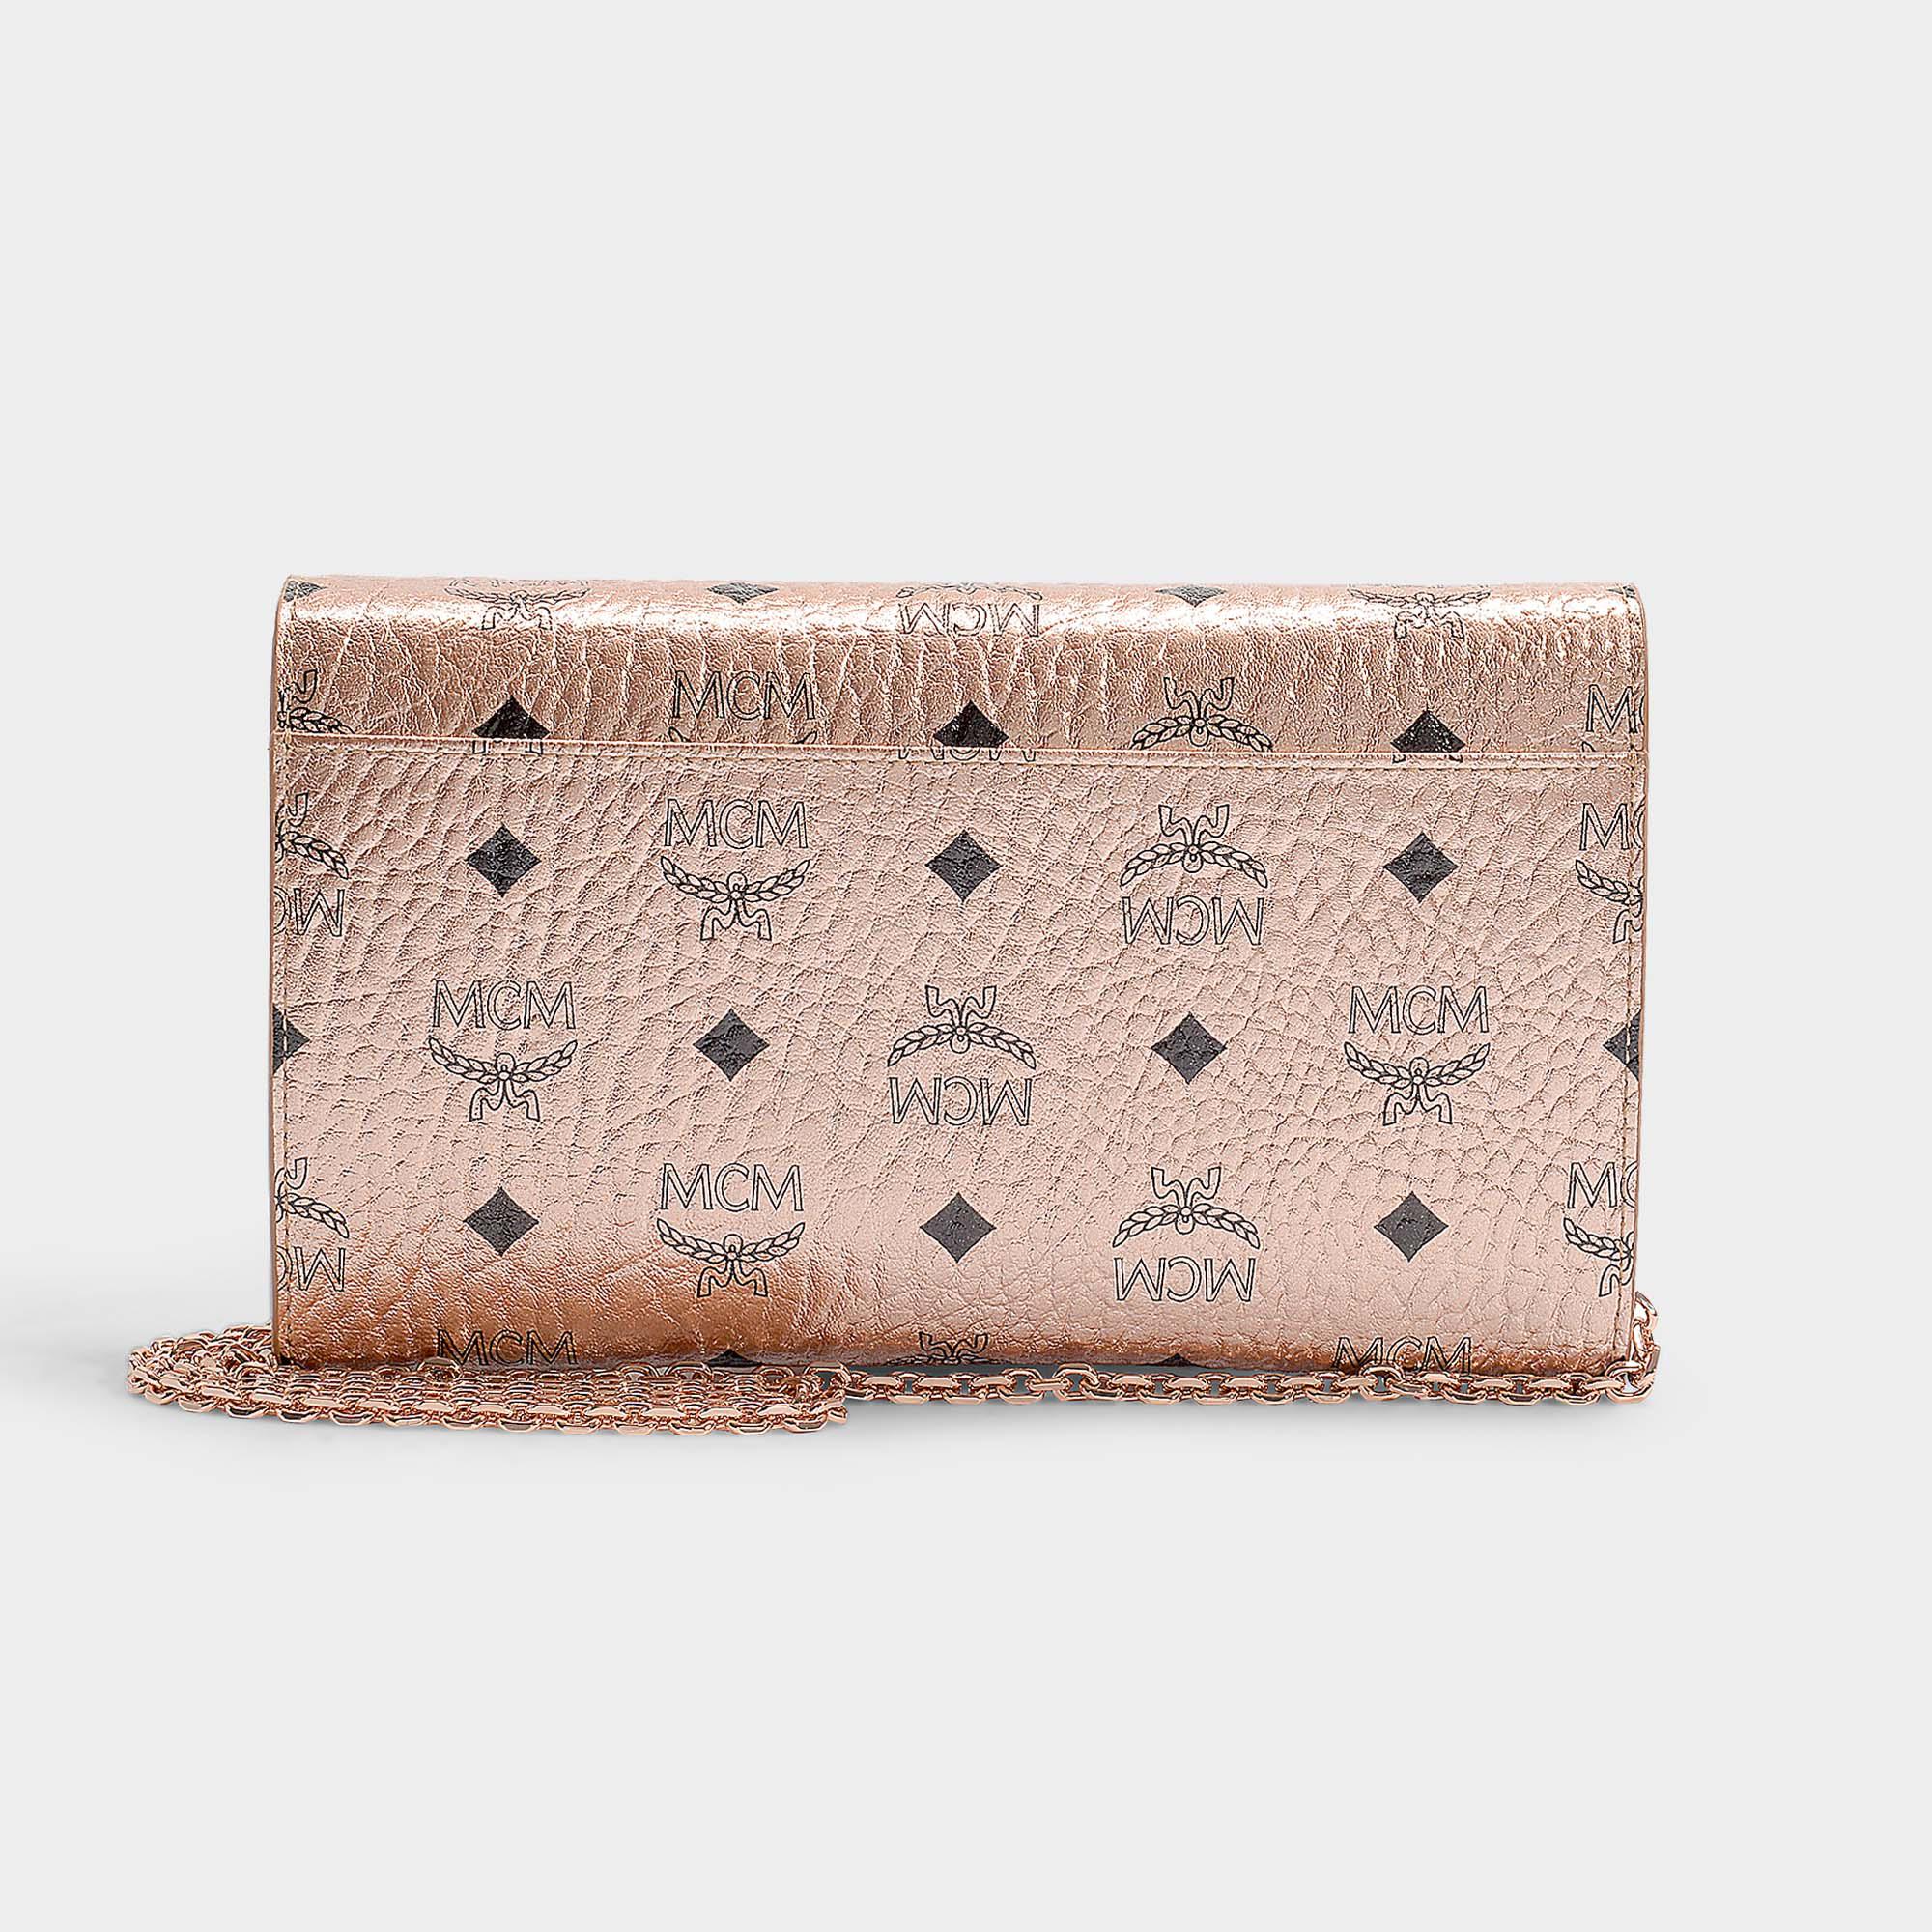 Mcm Large Wallet On Chain | IUCN Water